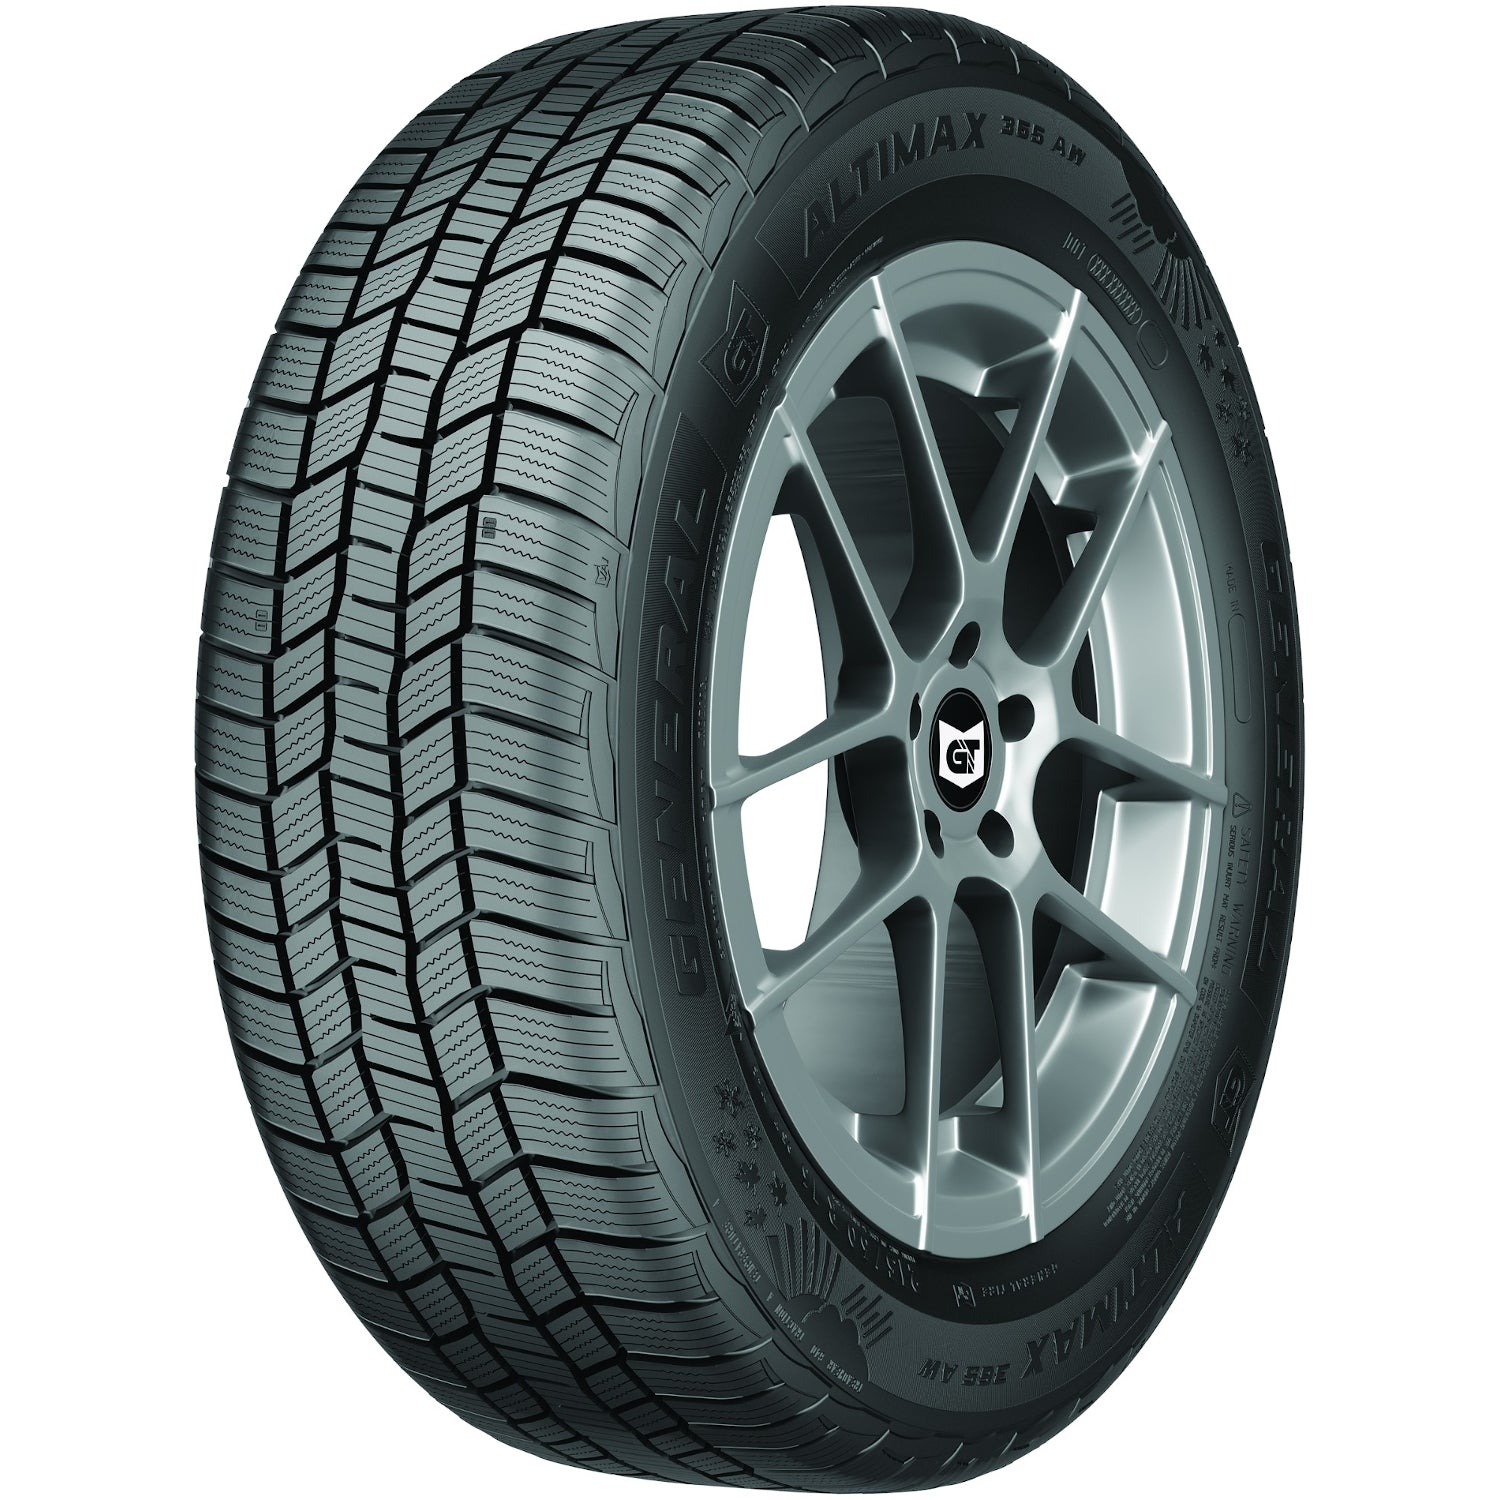 GENERAL ALTIMAX 365AW 235/65R17 (29X9.3R 17) Tires